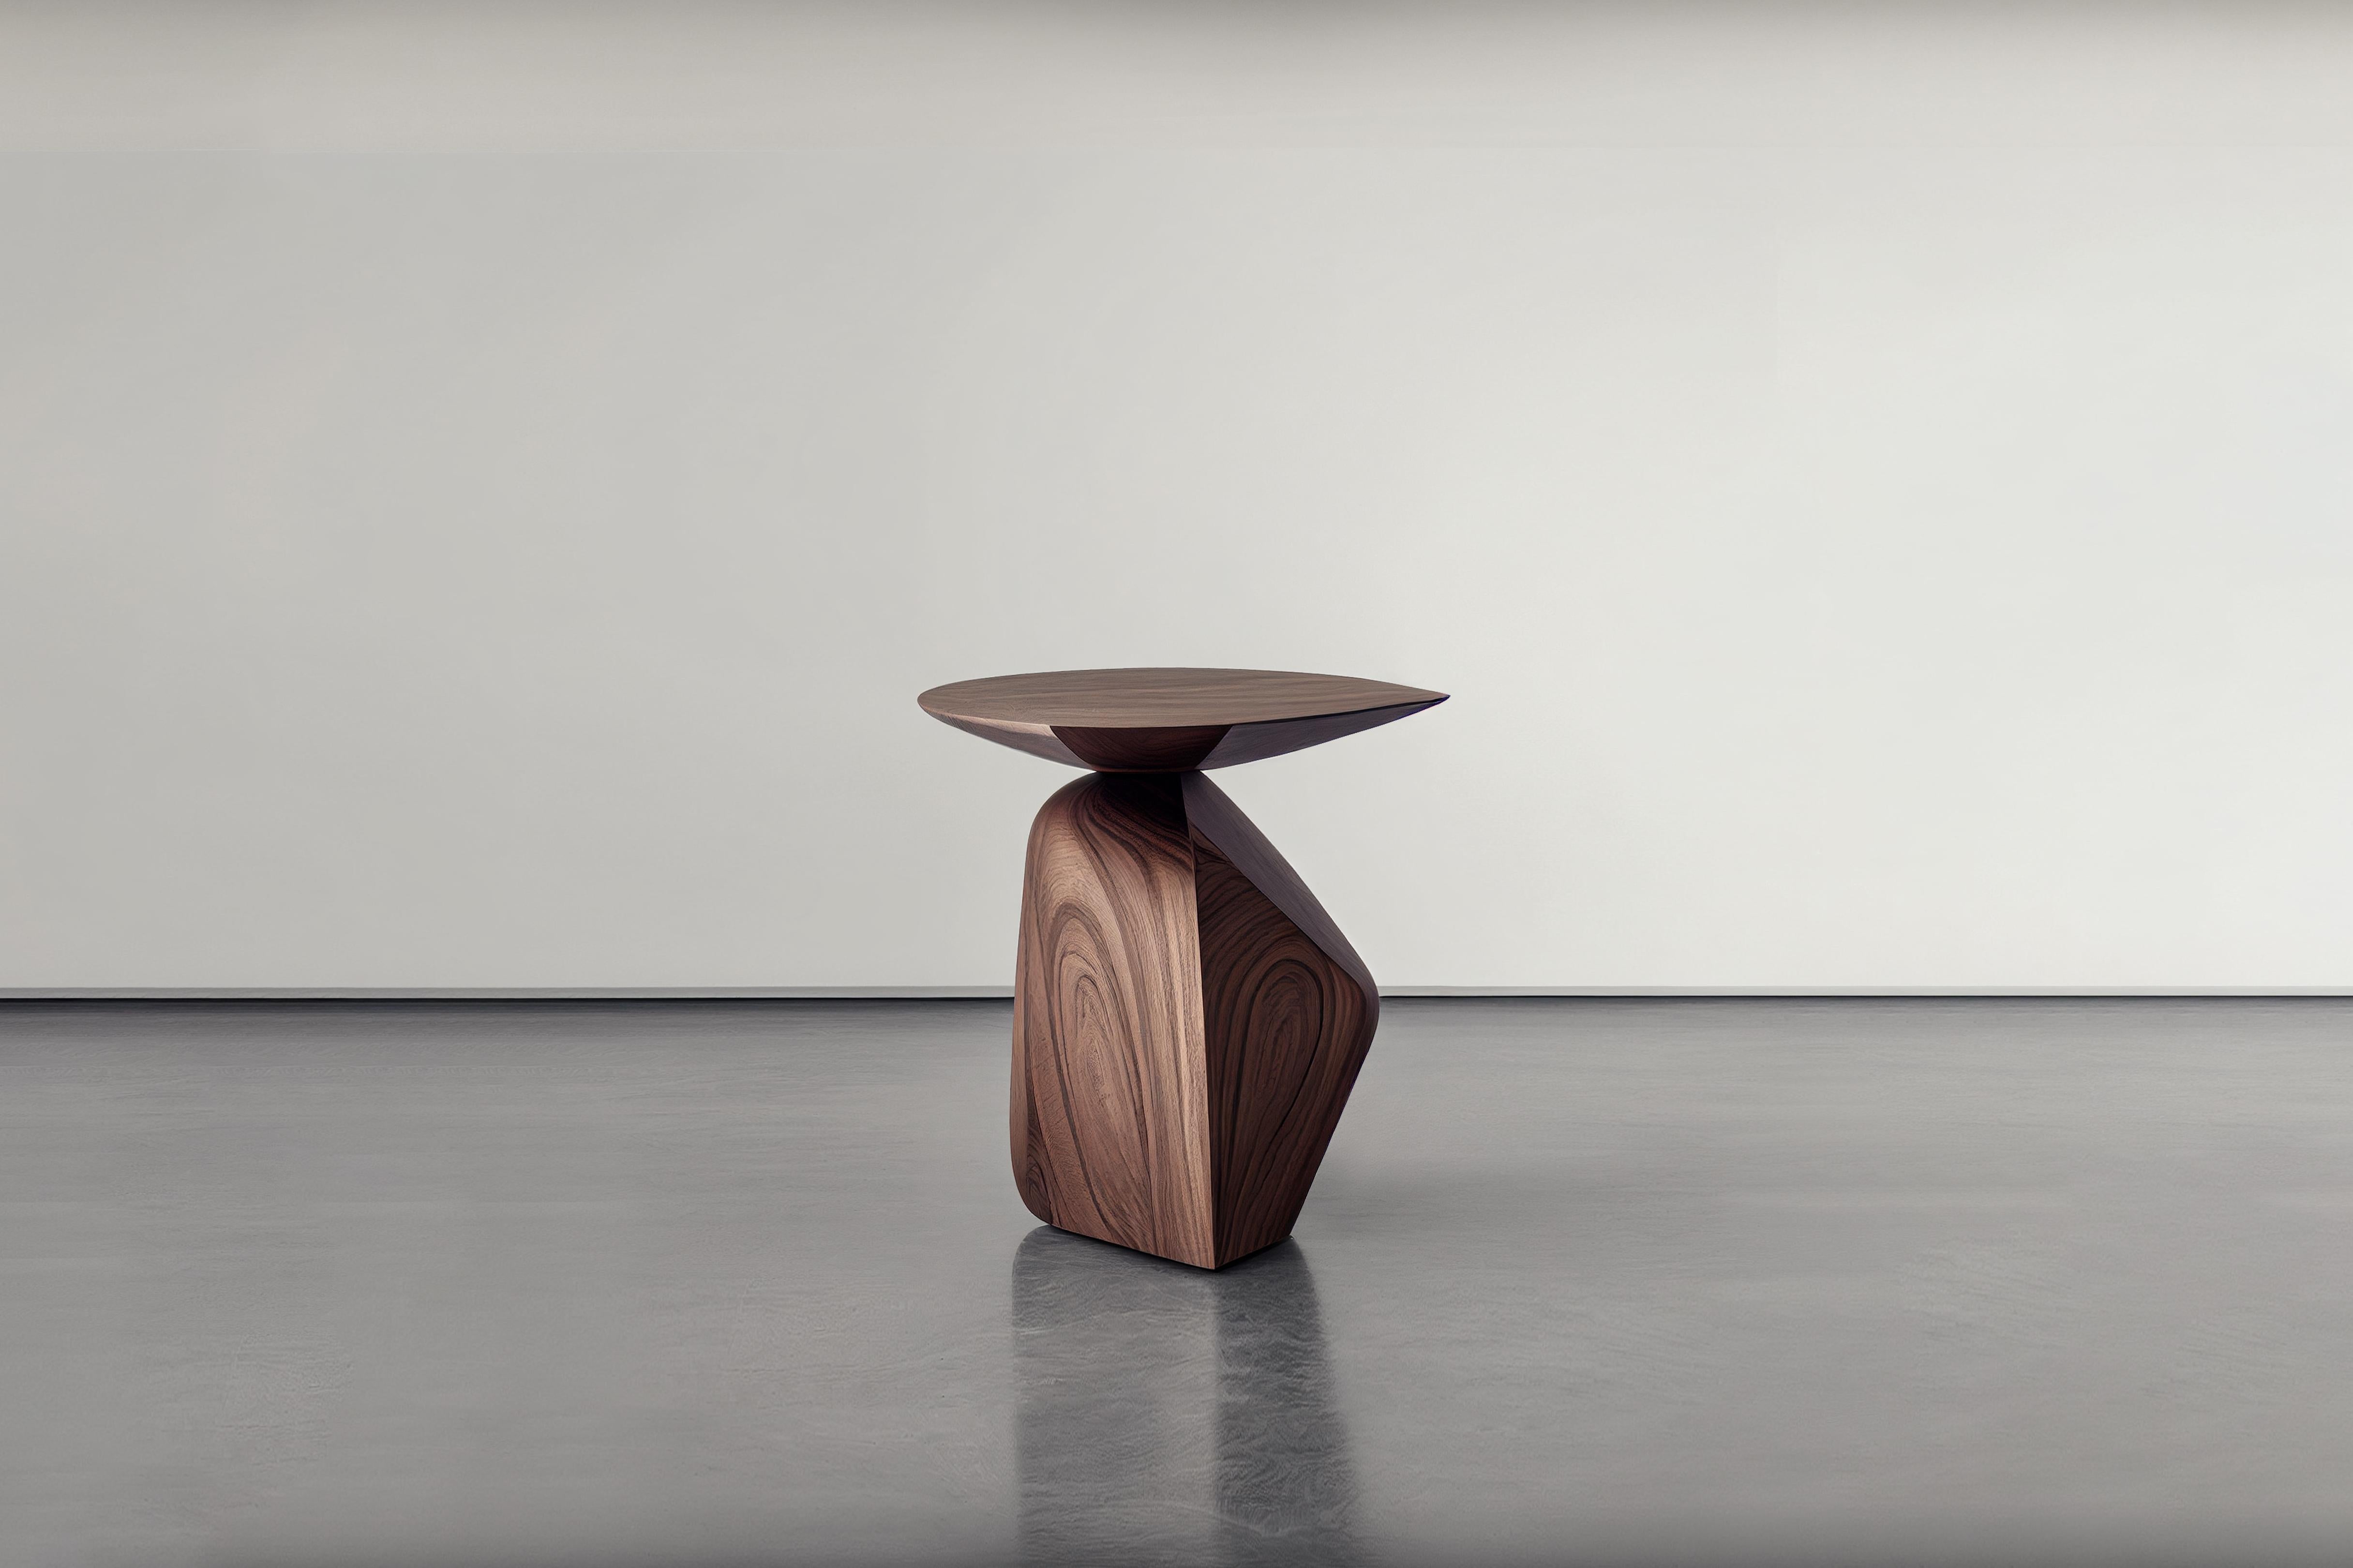 Sculptural side table made of solid walnut wood, nightstand, auxiliary table solace S1 by Joel Escalona

The solace side table series, designed by Joel Escalona, is a furniture collection that exudes balance and presence, thanks to its sensuous,